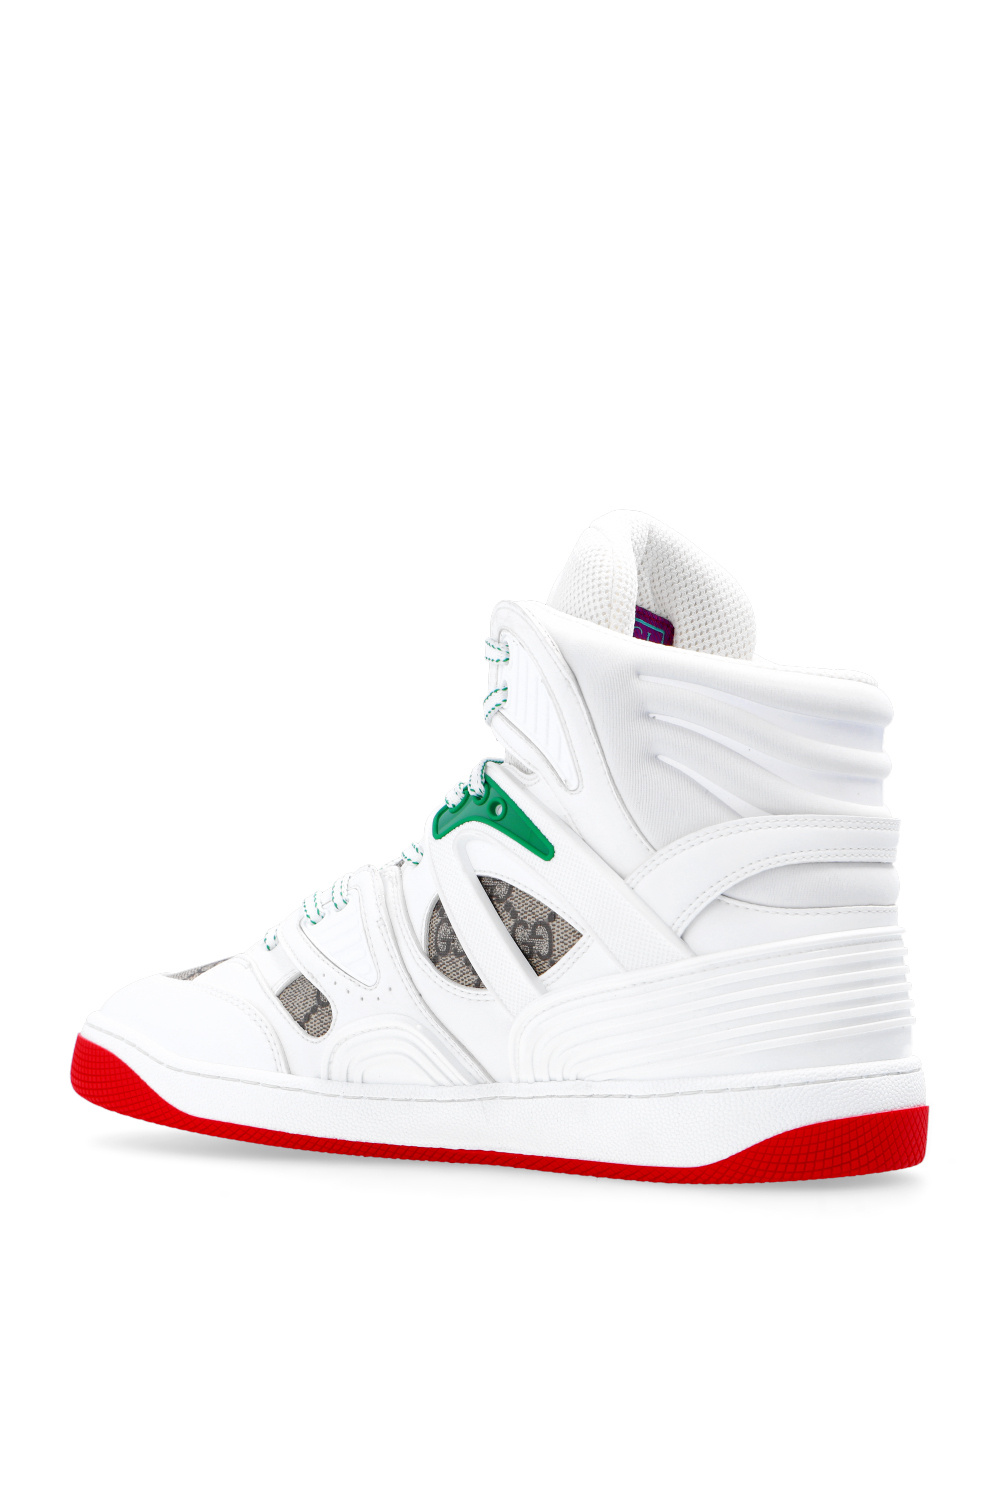 gucci from ‘Basket’ sneakers